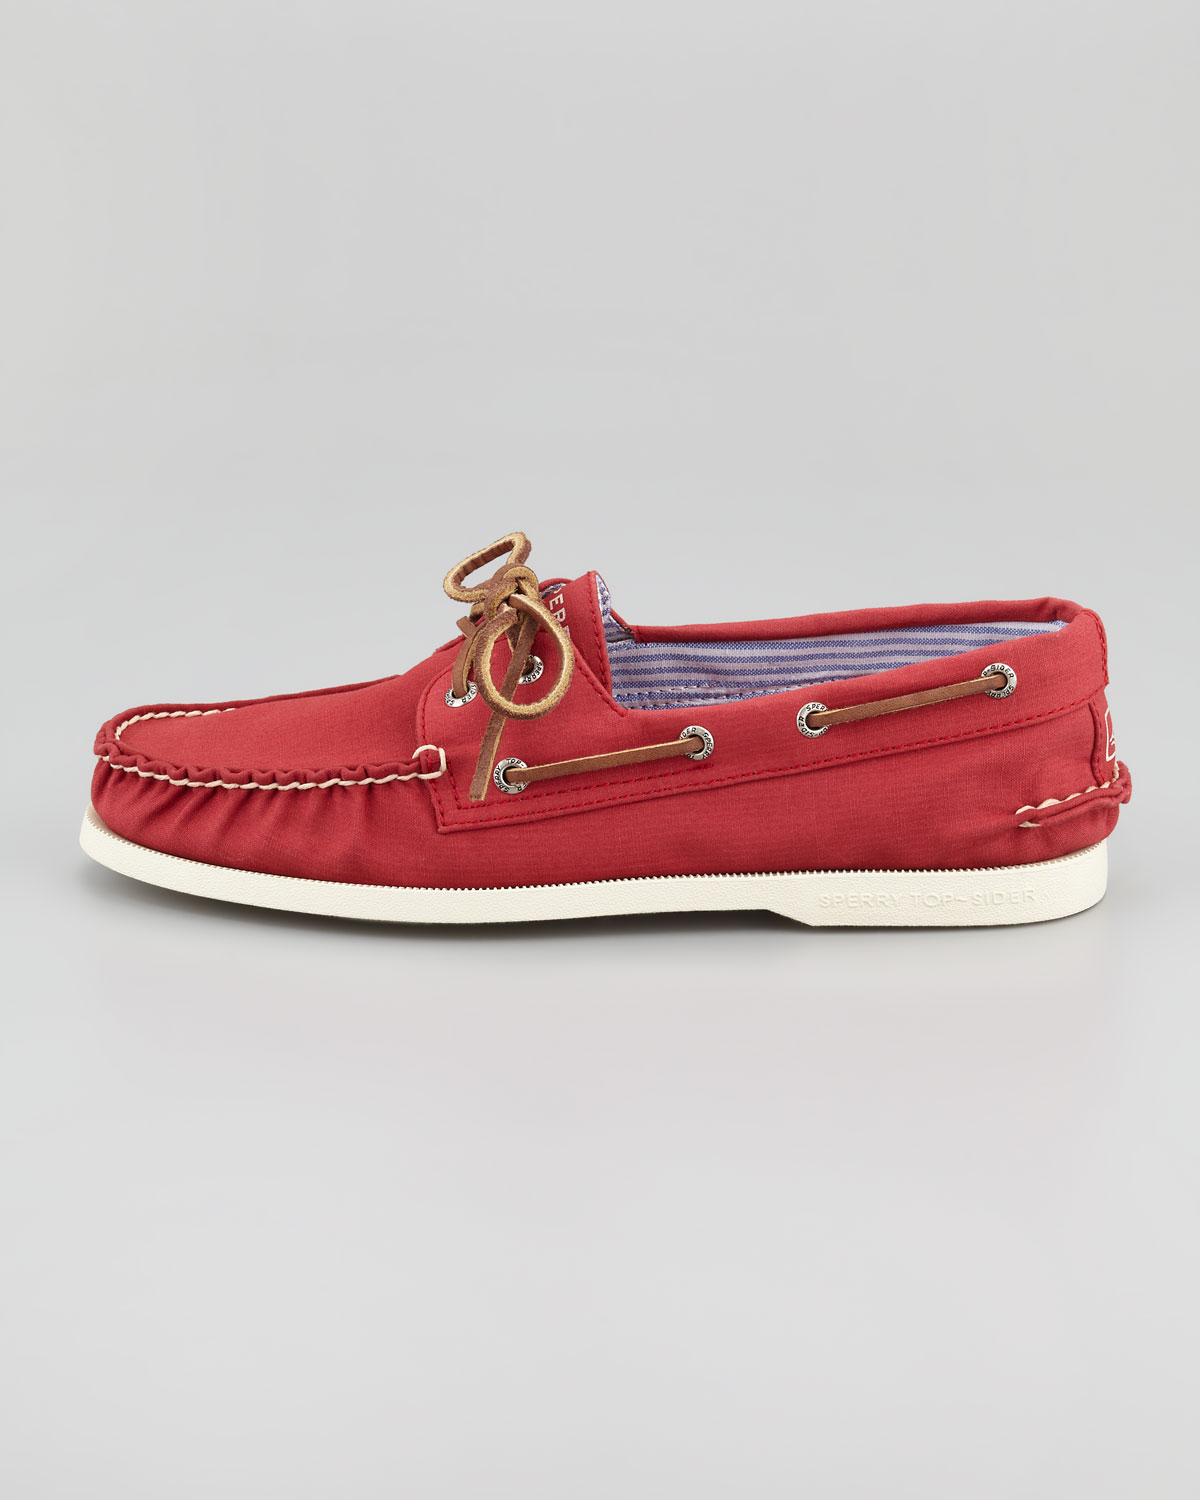 Lyst - Sperry Top-Sider Authentic Original Canvas Boat Shoe in Red for Men